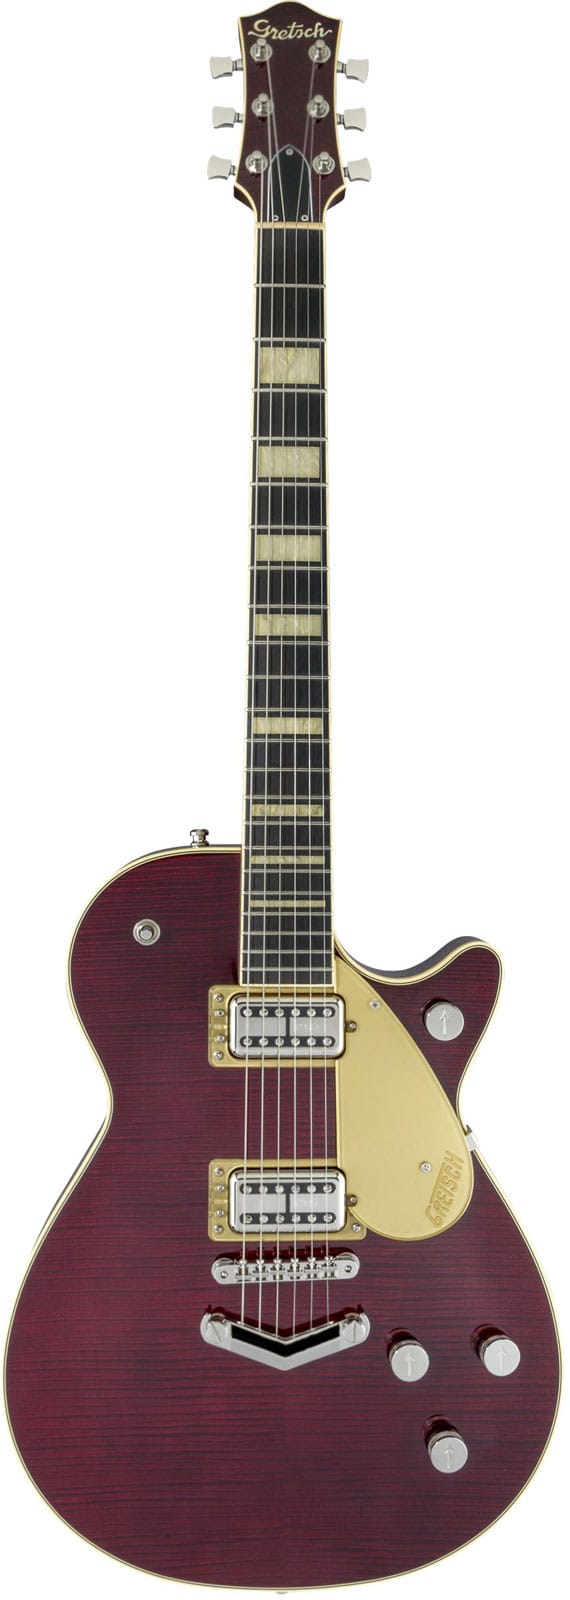 GRETSCH GUITARS G6228FM PLAYERS EDITION JET BT WITH V-STOPTAIL AND FLAME MAPLE EBO, DARK CHERRY STAIN